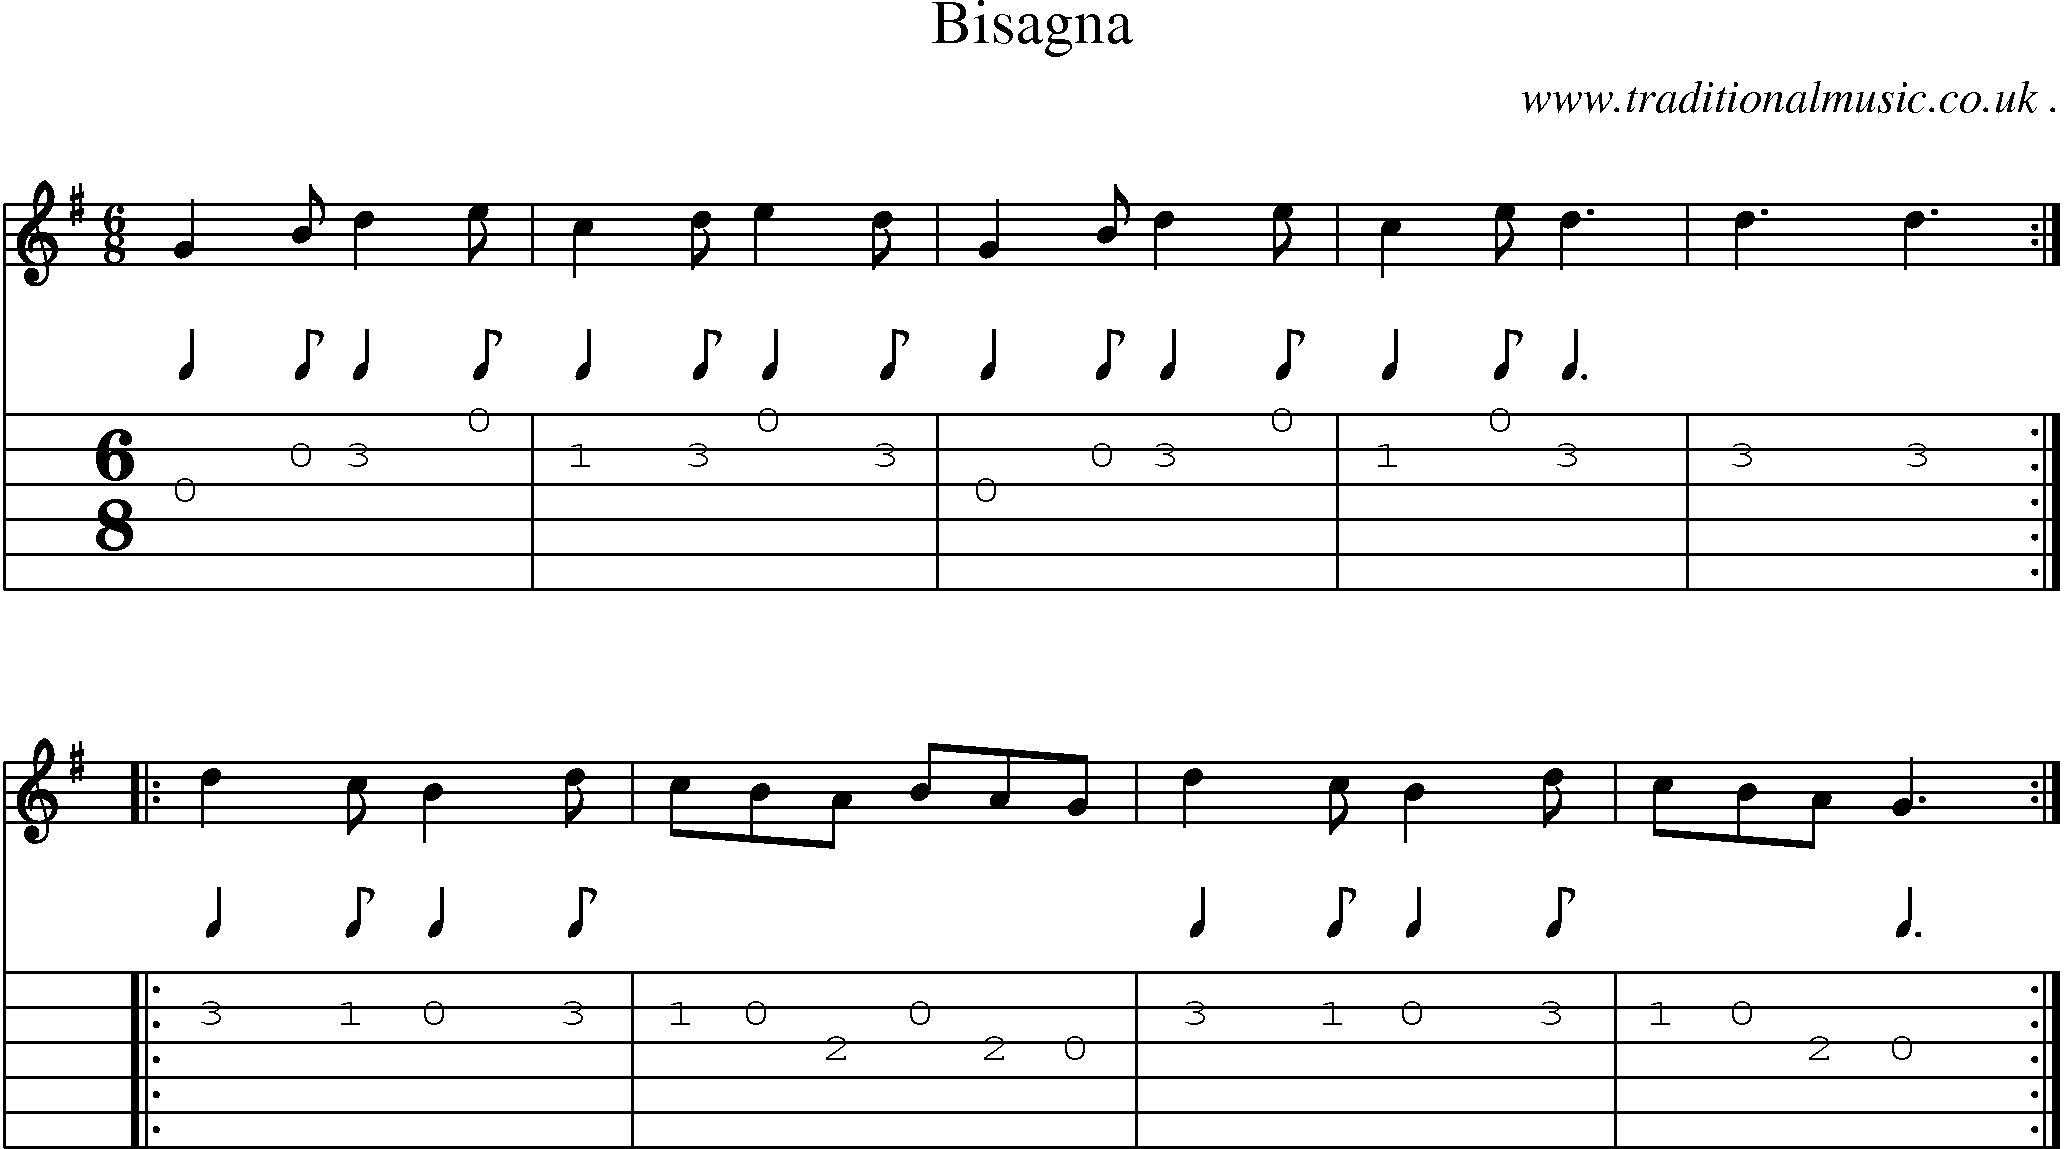 Sheet-Music and Guitar Tabs for Bisagna